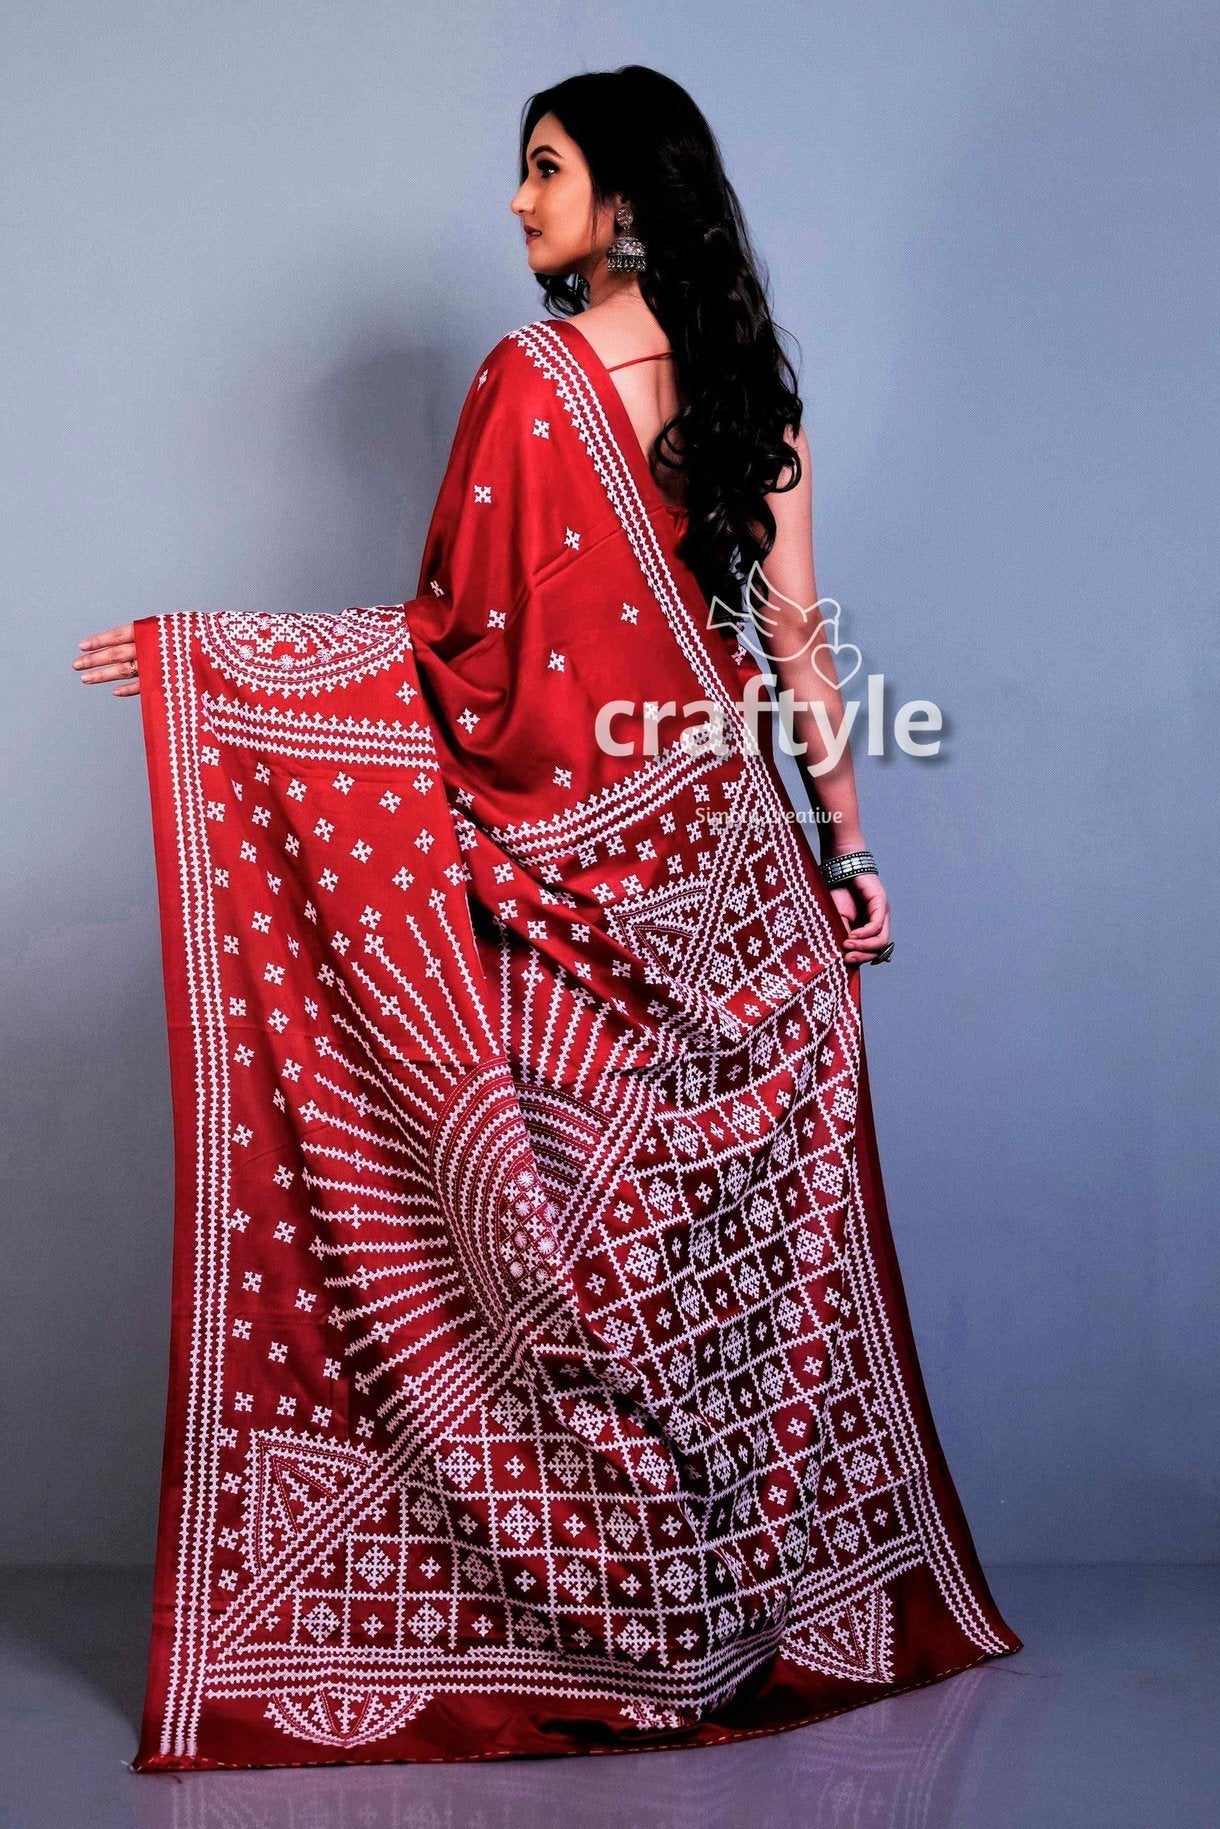 Currant Red Embroidered Kantha Stitch Blended Bangalore Silk Saree-Craftyle